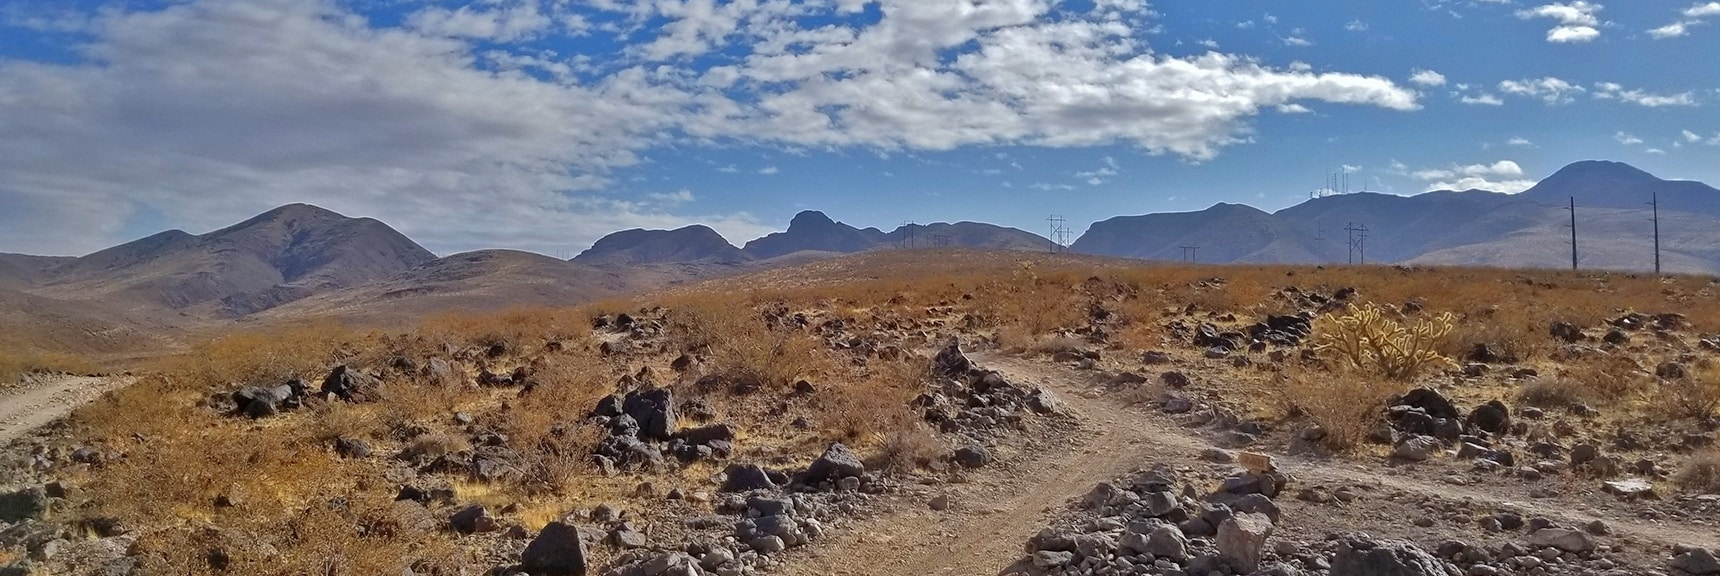 View Back Up the Trail from Near Anthem | McCullough Hills Trail in Sloan Canyon National Conservation Area, Nevada